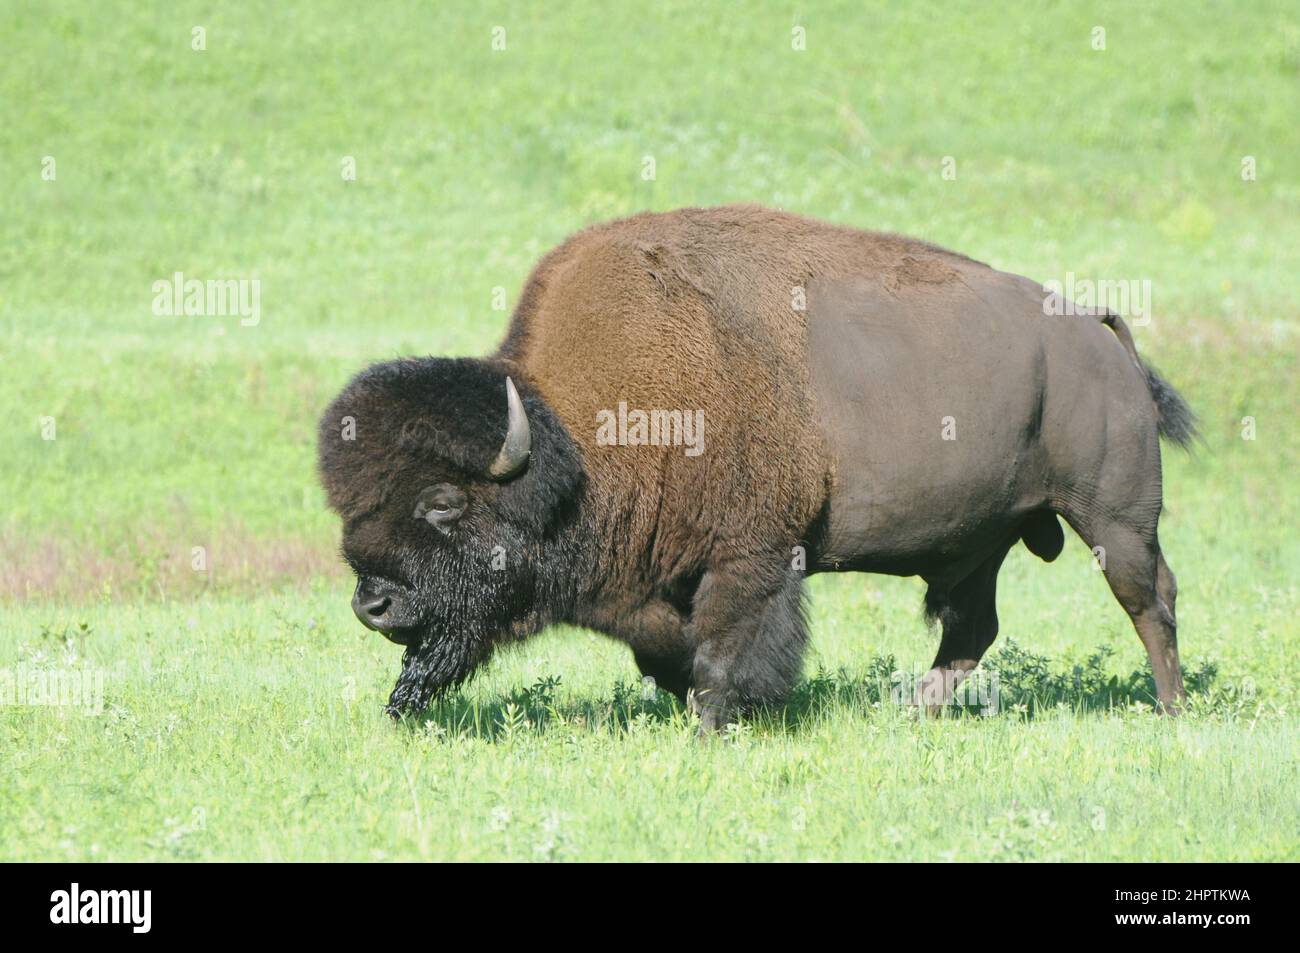 Bison or Buffalo grazing in the long green grasses in the plains of South Dakota, United States. Stock Photo